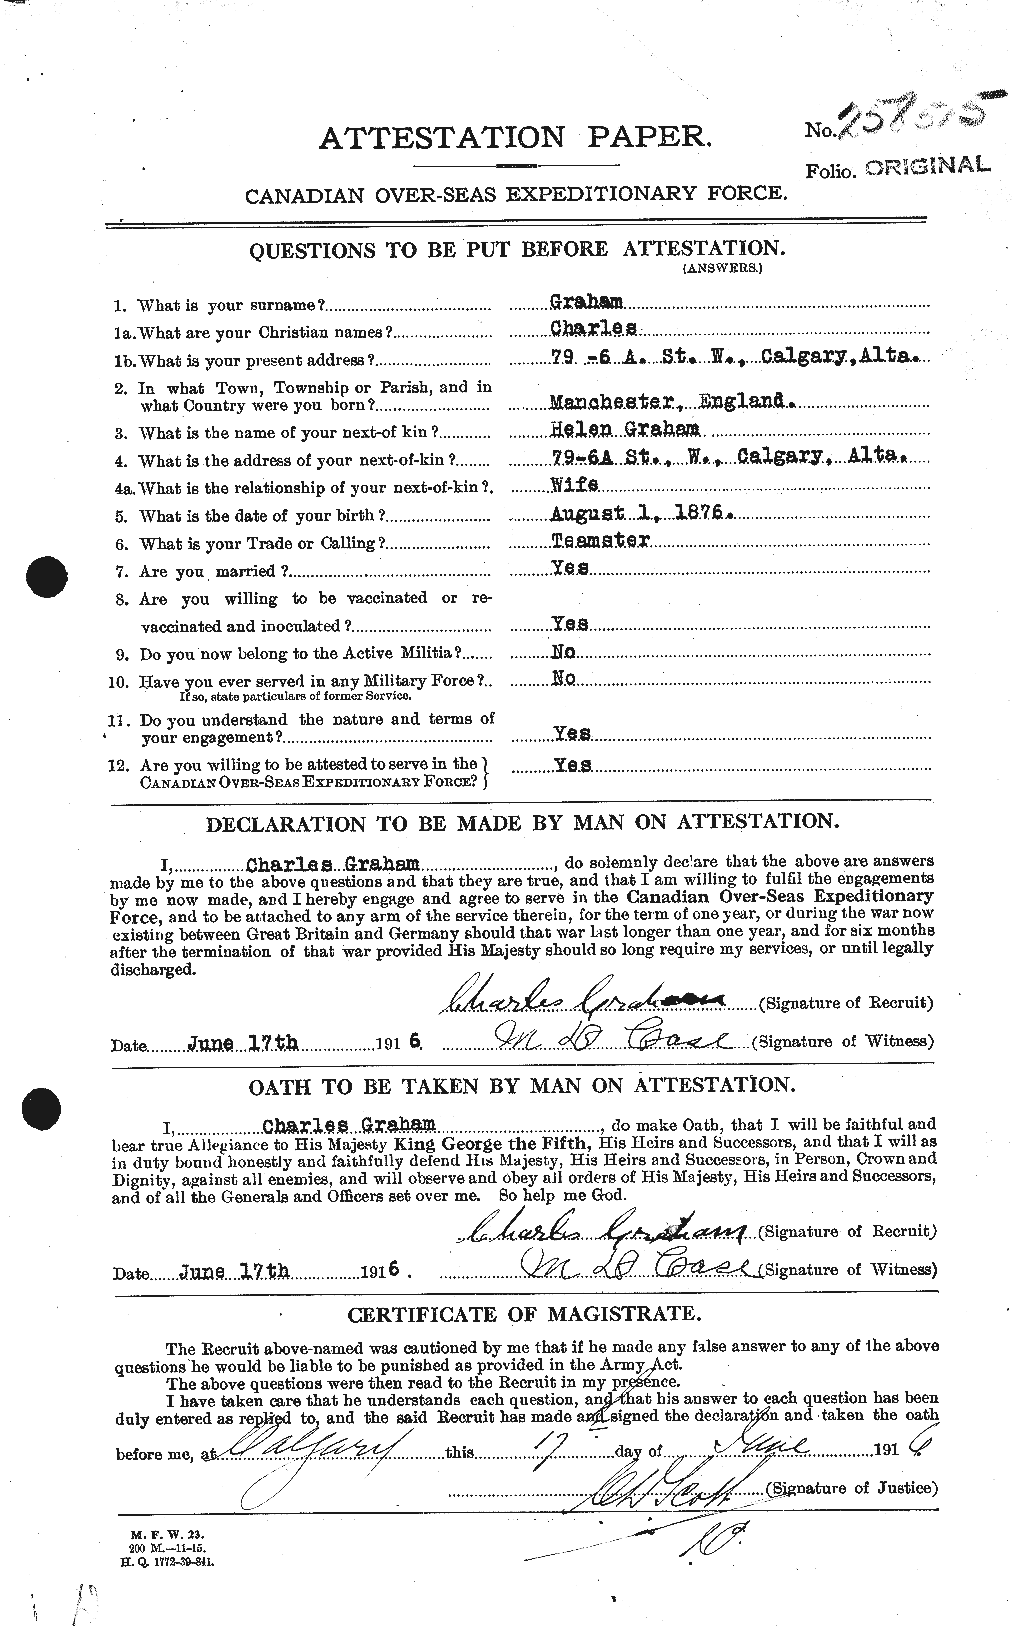 Personnel Records of the First World War - CEF 359692a